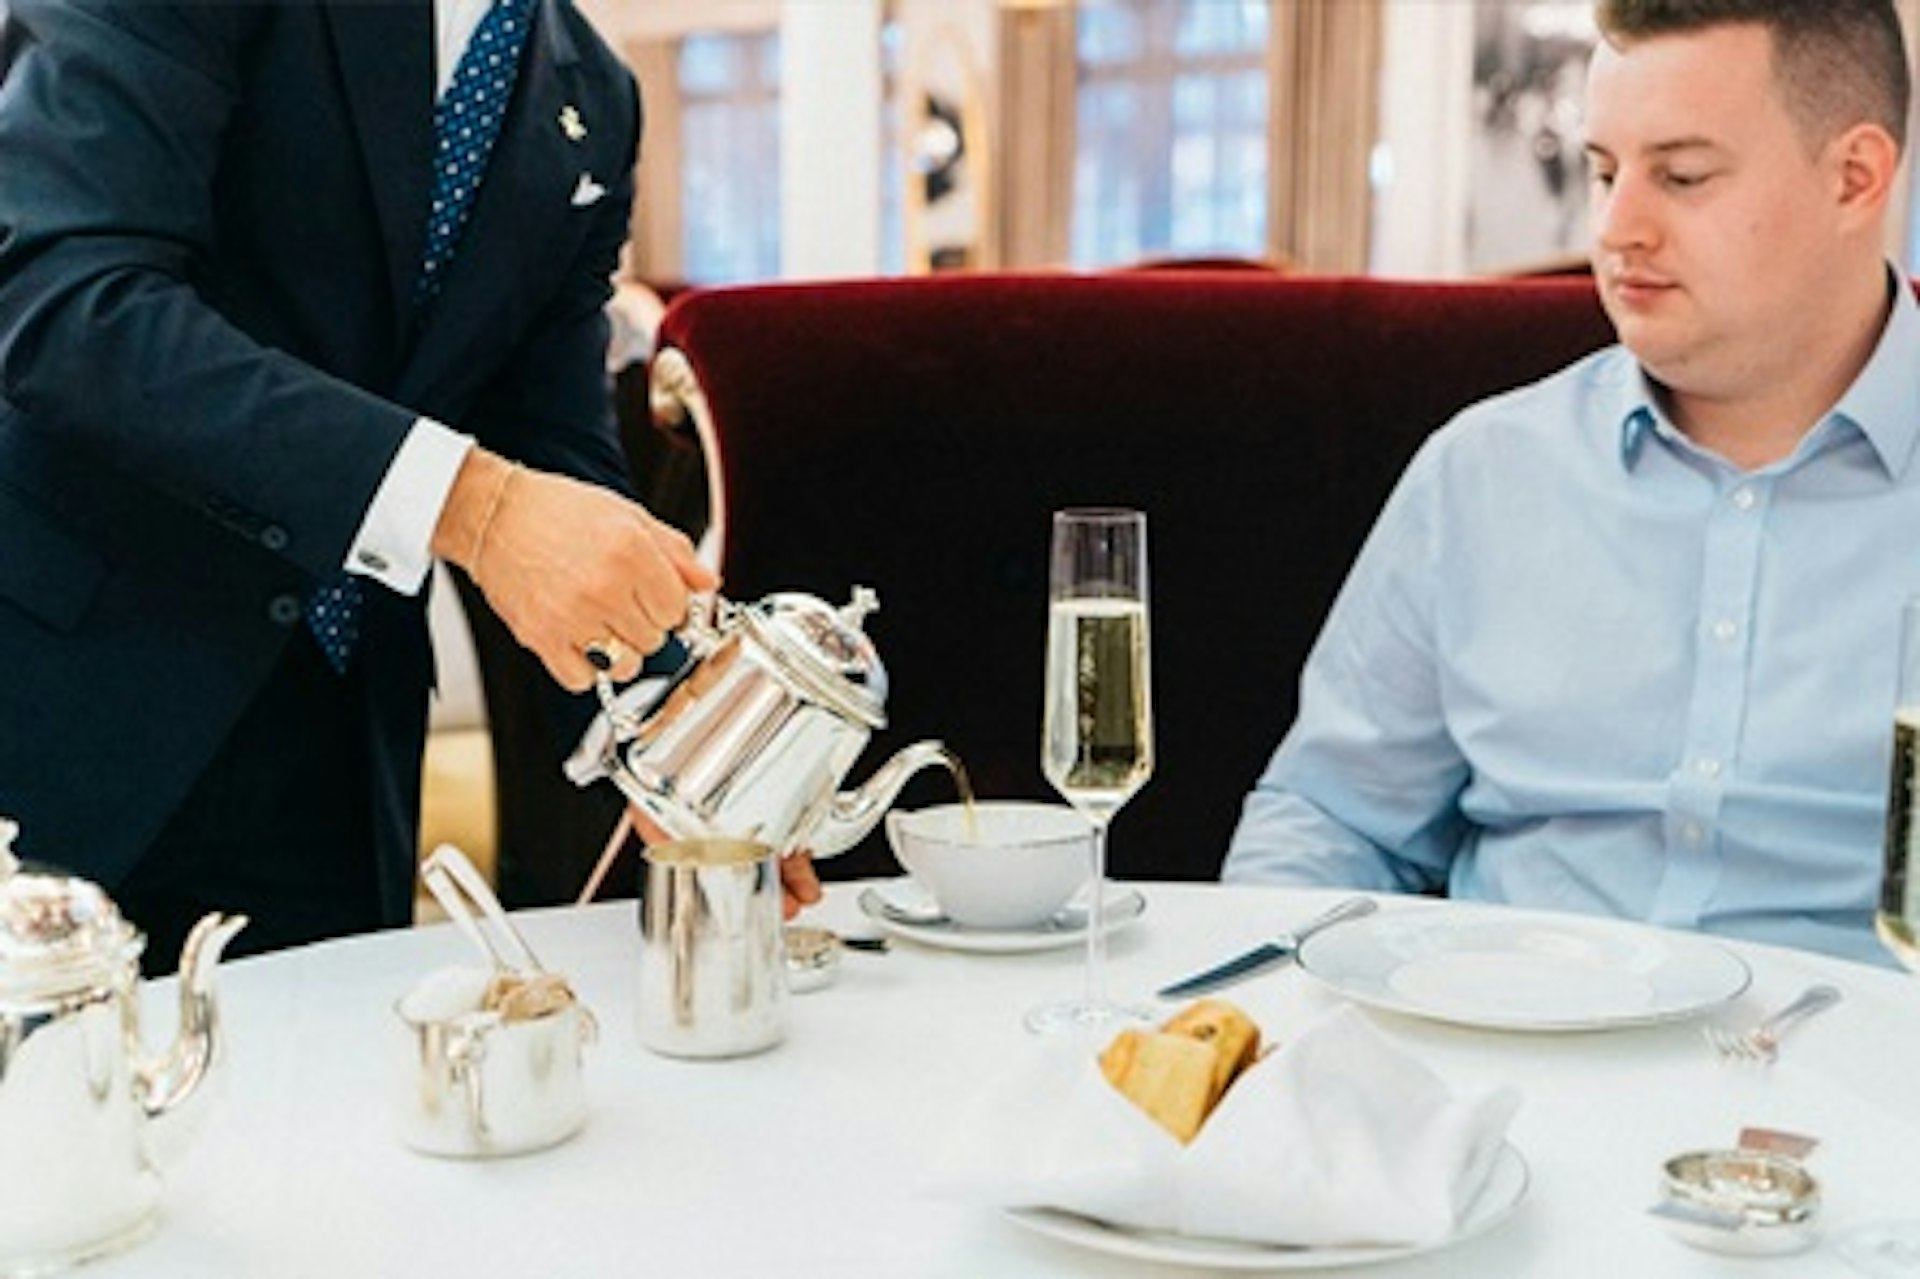 Cream Tea with a Glass of Champagne for Two at Harrods 4